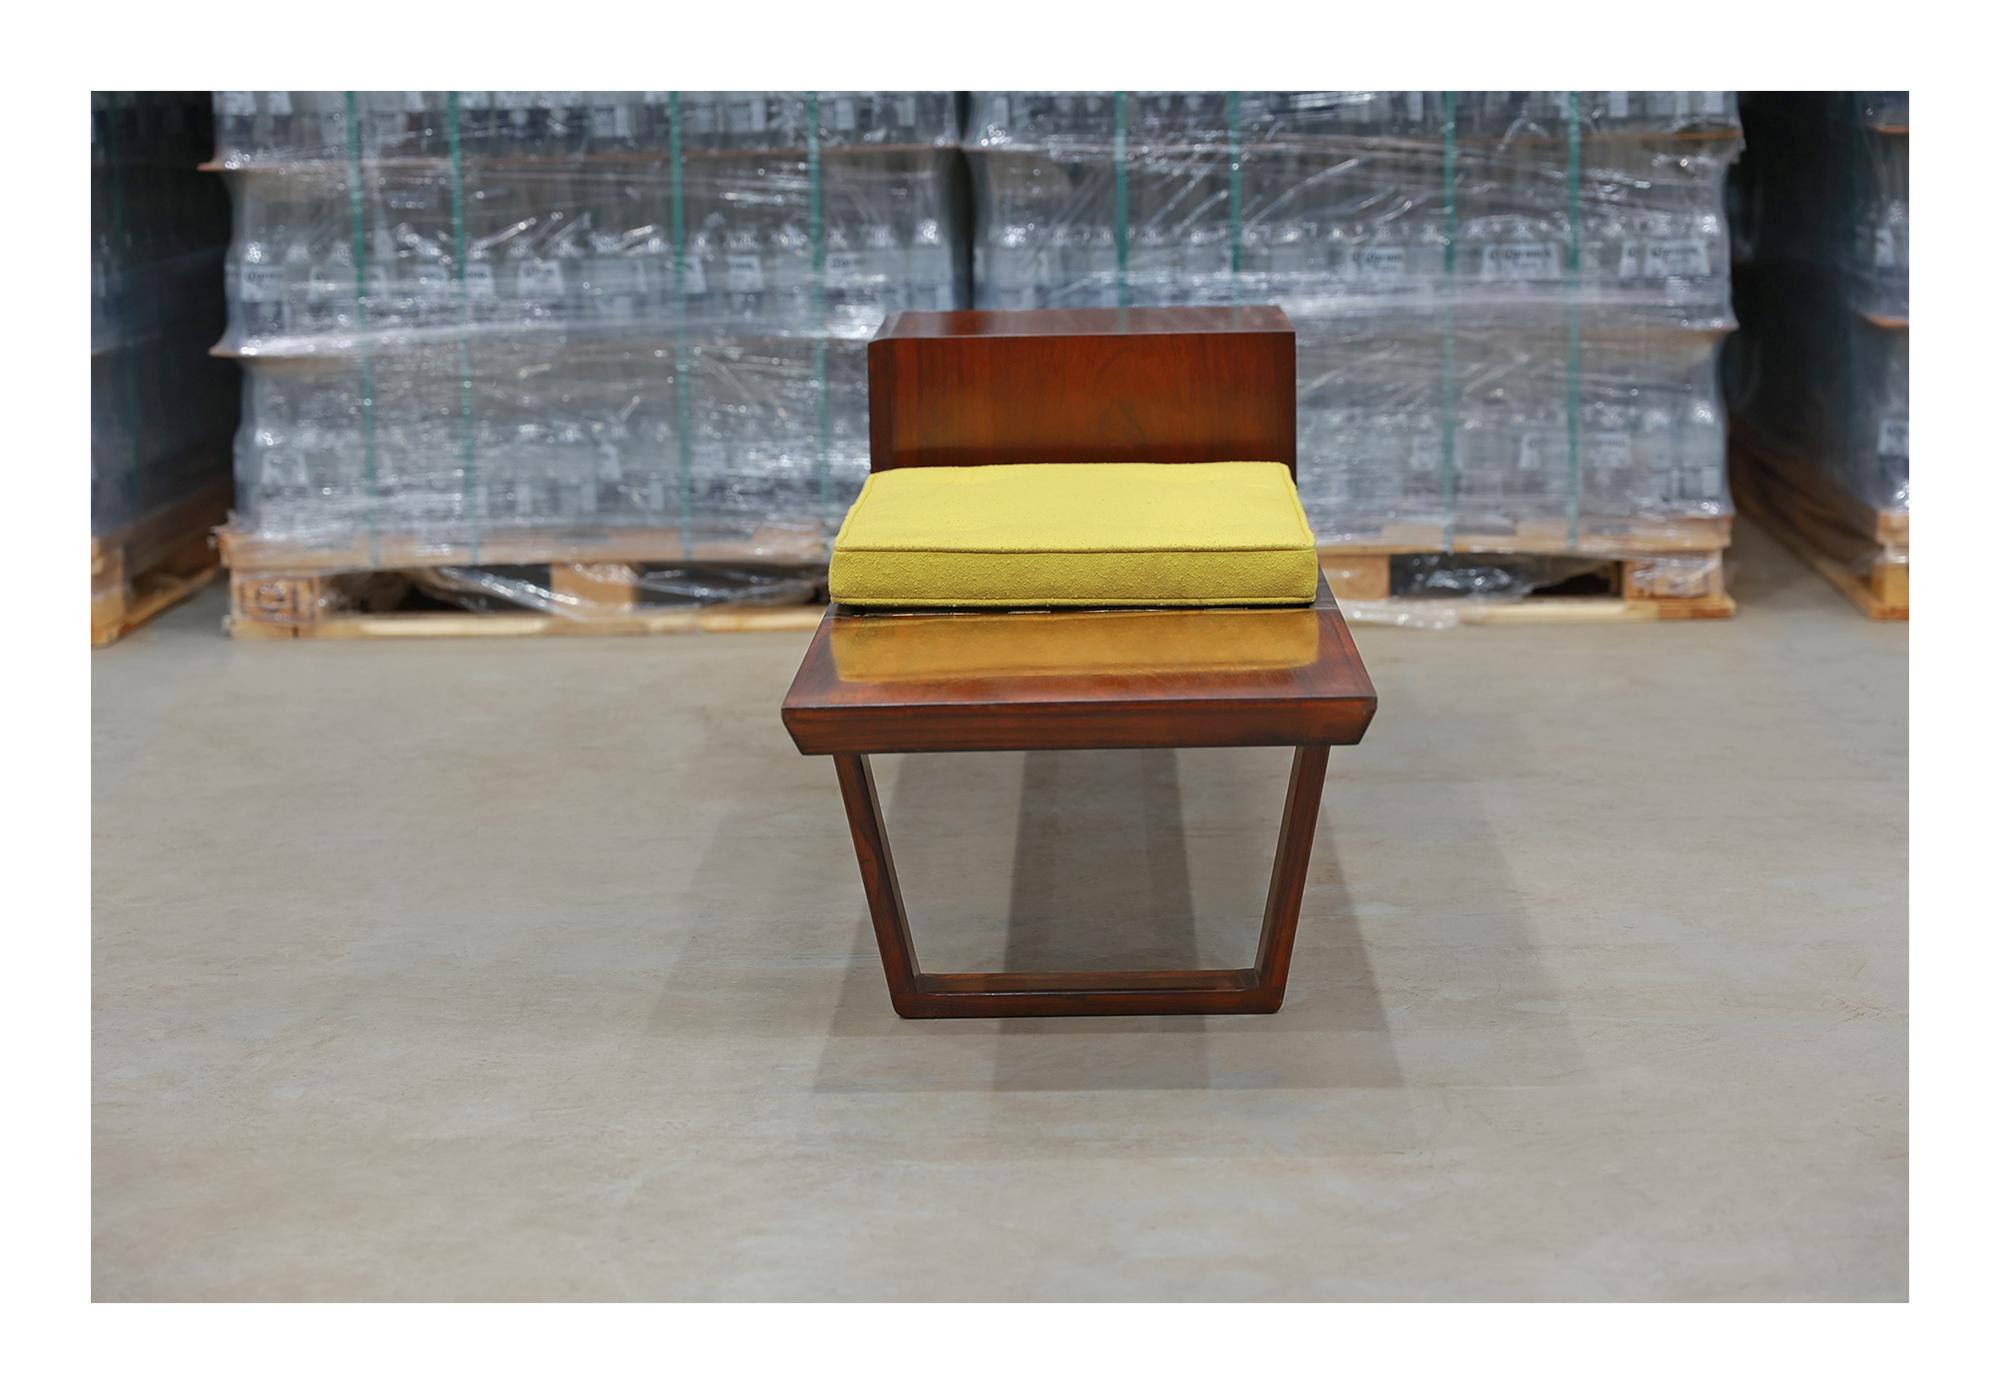 Hand-Painted  Brazilian Modern Bench in Hardwood, by Carlo Hauner for Forma, Brazil, c. 1950 For Sale